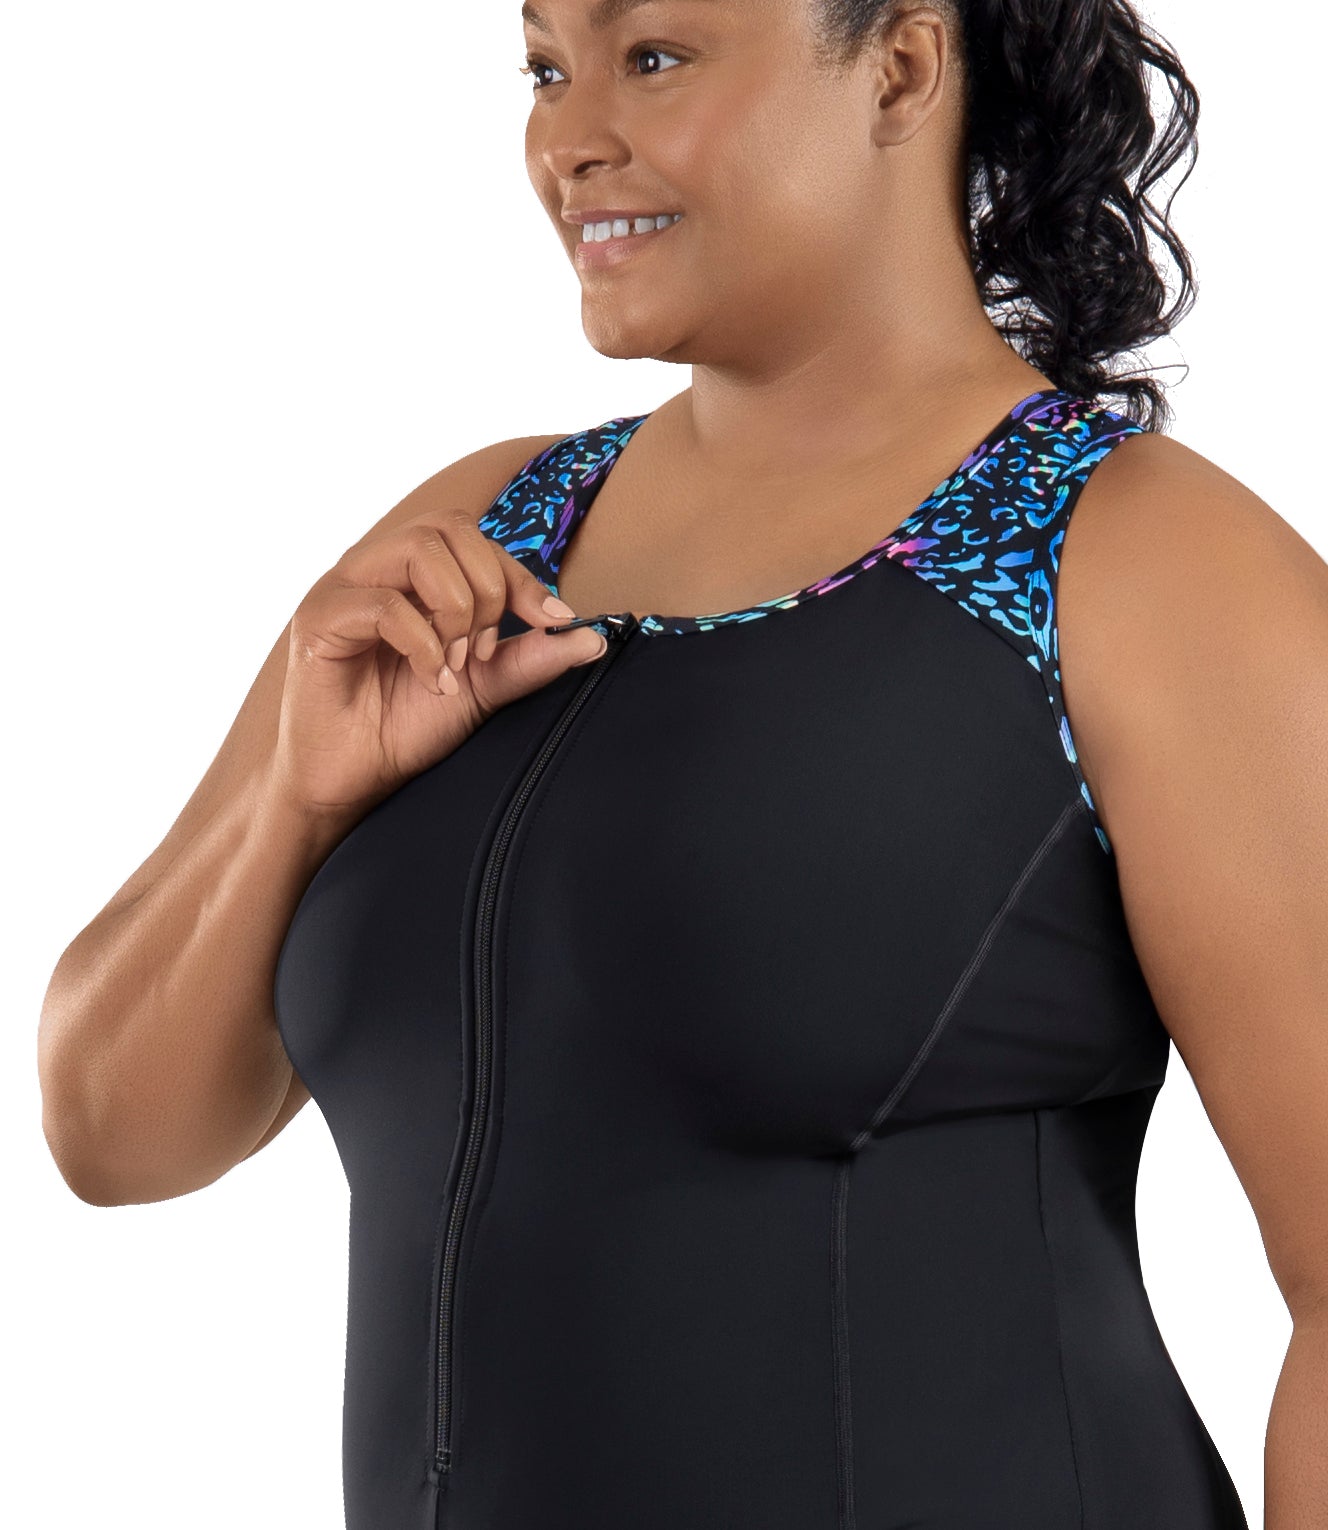 Plus-Size Model, facing forward side view, wearing JunoActive's QuikEnergy Racerback Zip Front Aquatard in color reef print. Right hand holding zipper at top of suit.